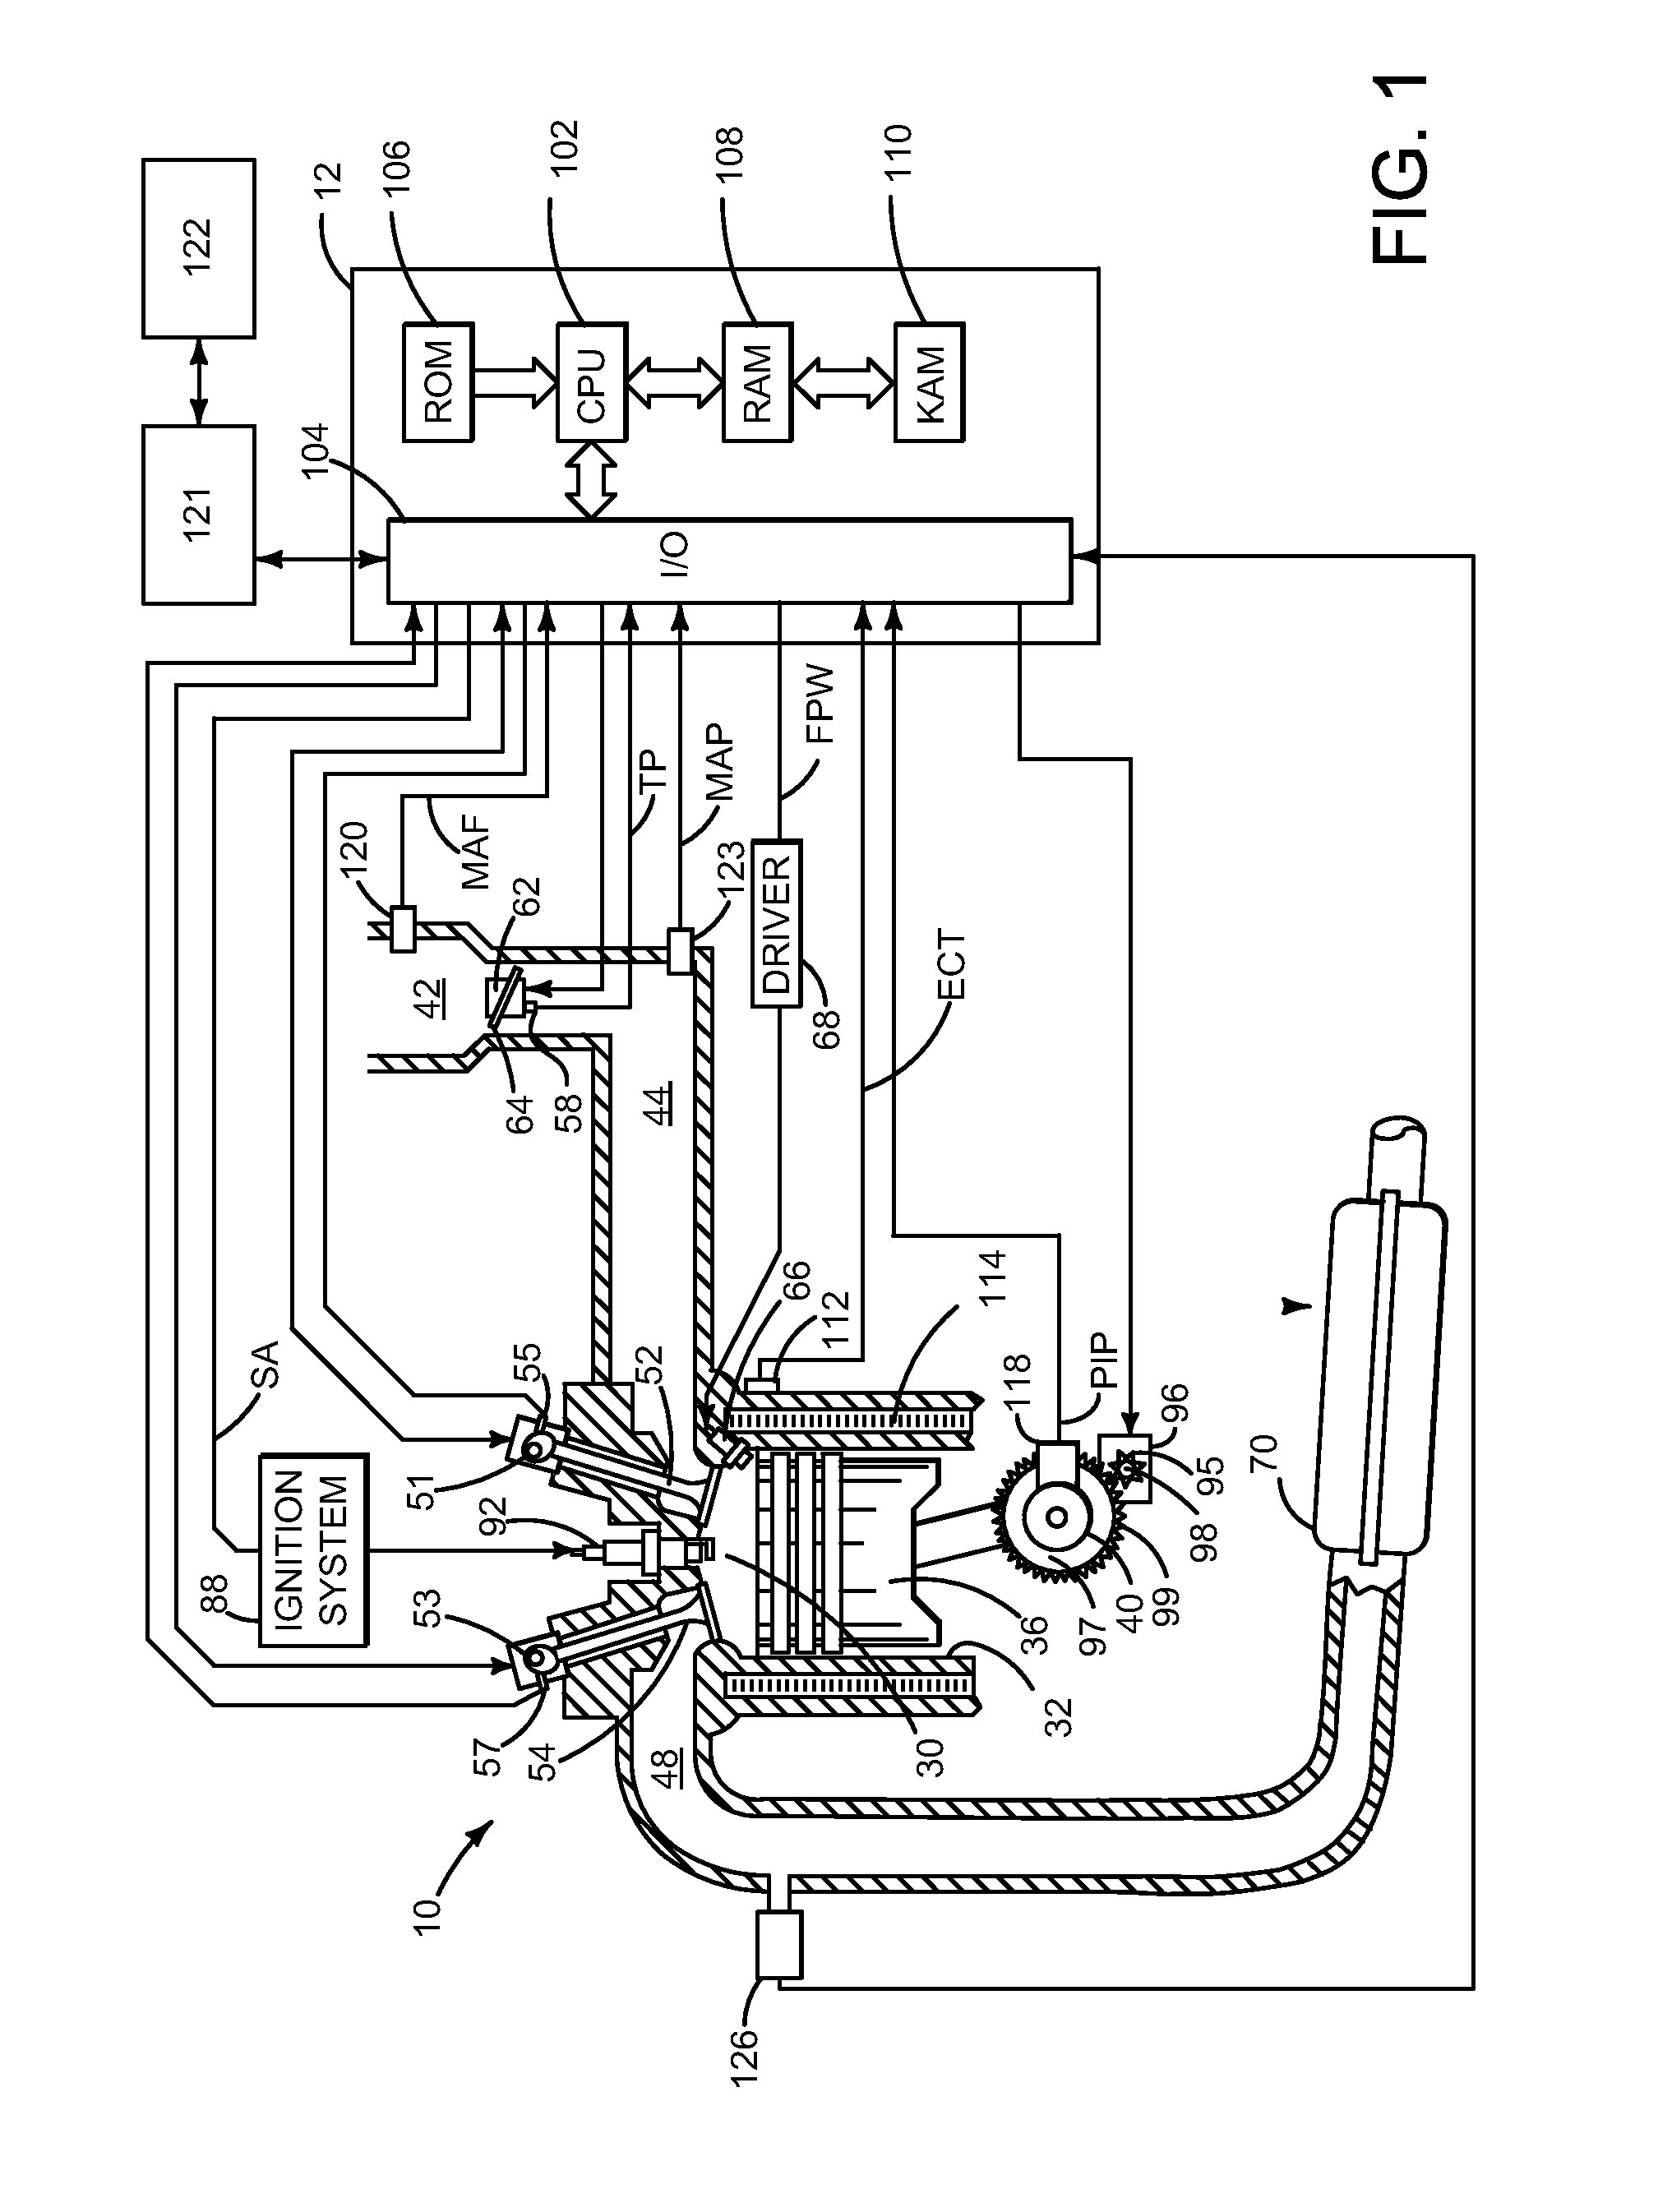 Systems and methods for driveline torque control